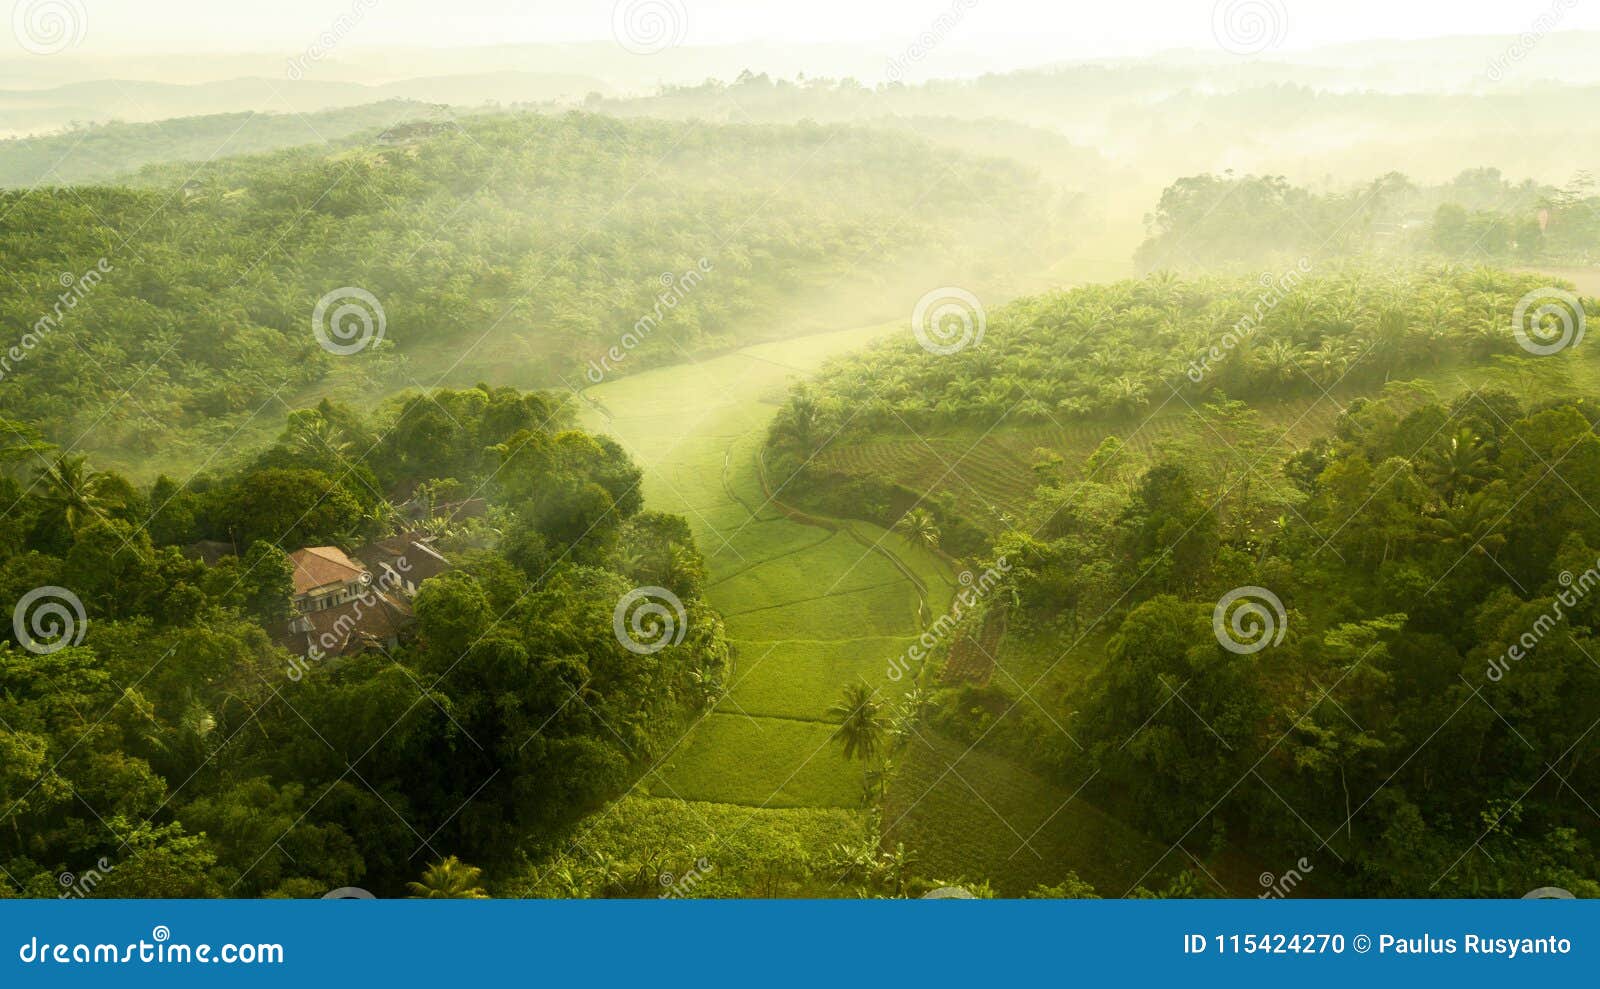 view of palm oil plantation and rice field